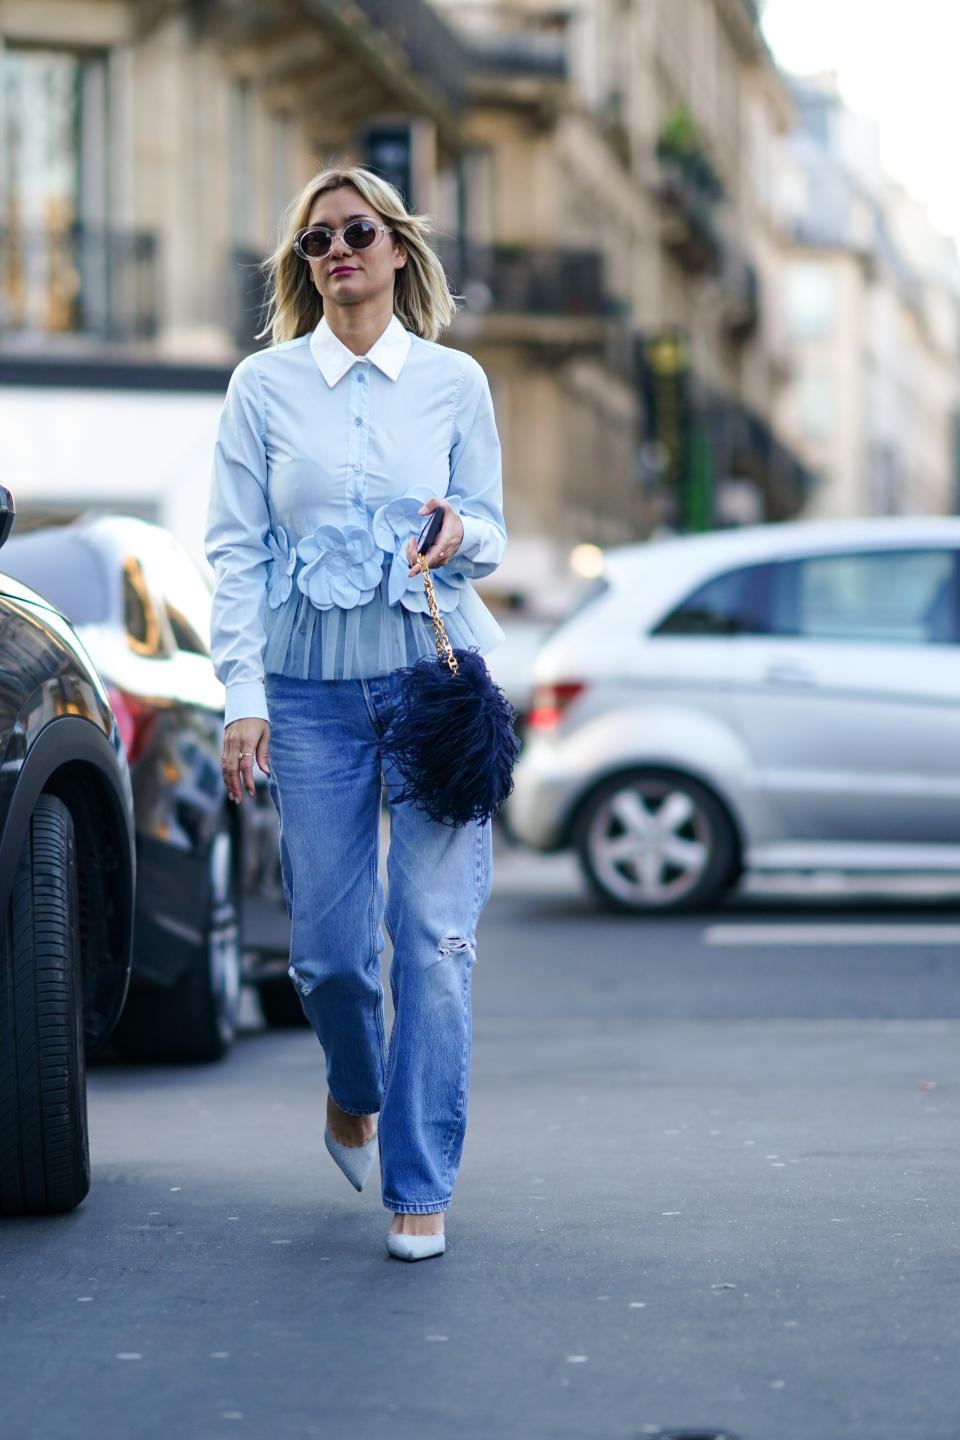 PARIS, FRANCE - JANUARY 22: Anne-Laure Mais wears sunglasses, a light blue ruffled shirt with a white collar and flowers embroidered, blue ripped jeans, light blue pointy pumps, a bag decorated with navy-blue feathers, outside Viktor & Rolf, during Paris Fashion Week - Haute Couture Spring/Summer 2020, on January 22, 2020 in Paris, France. (Photo by Edward Berthelot/Getty Images )